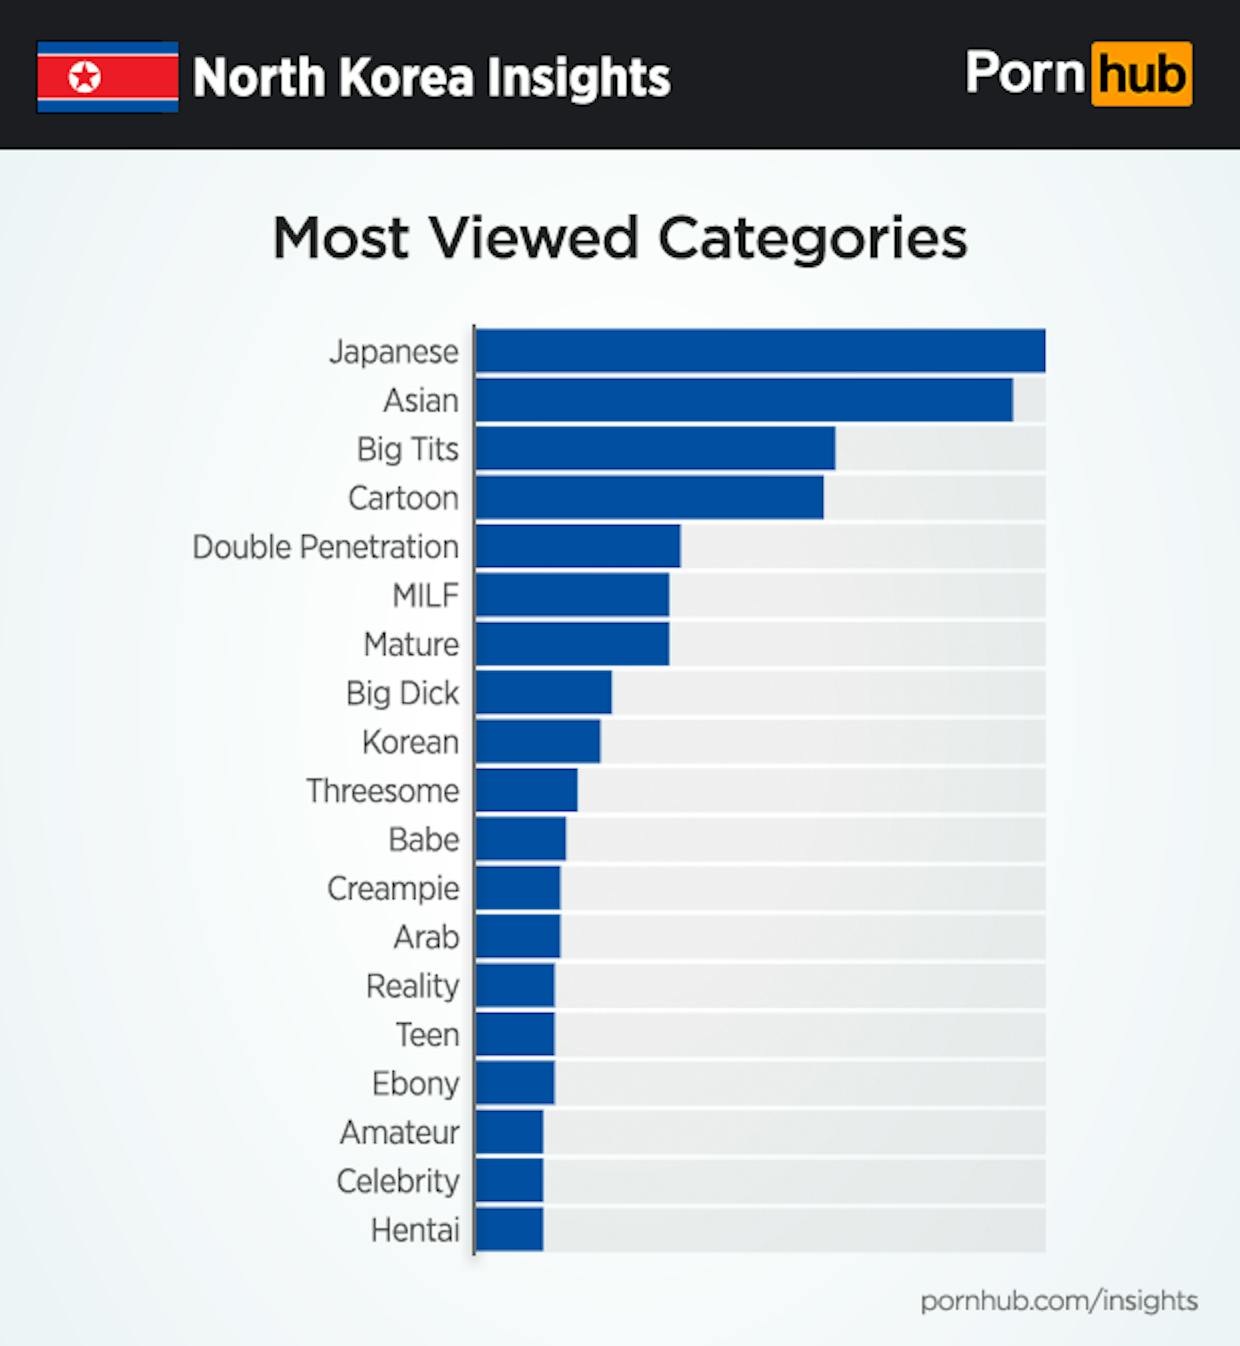 Pornhub Just Released New Data on What North Koreans Watch ...